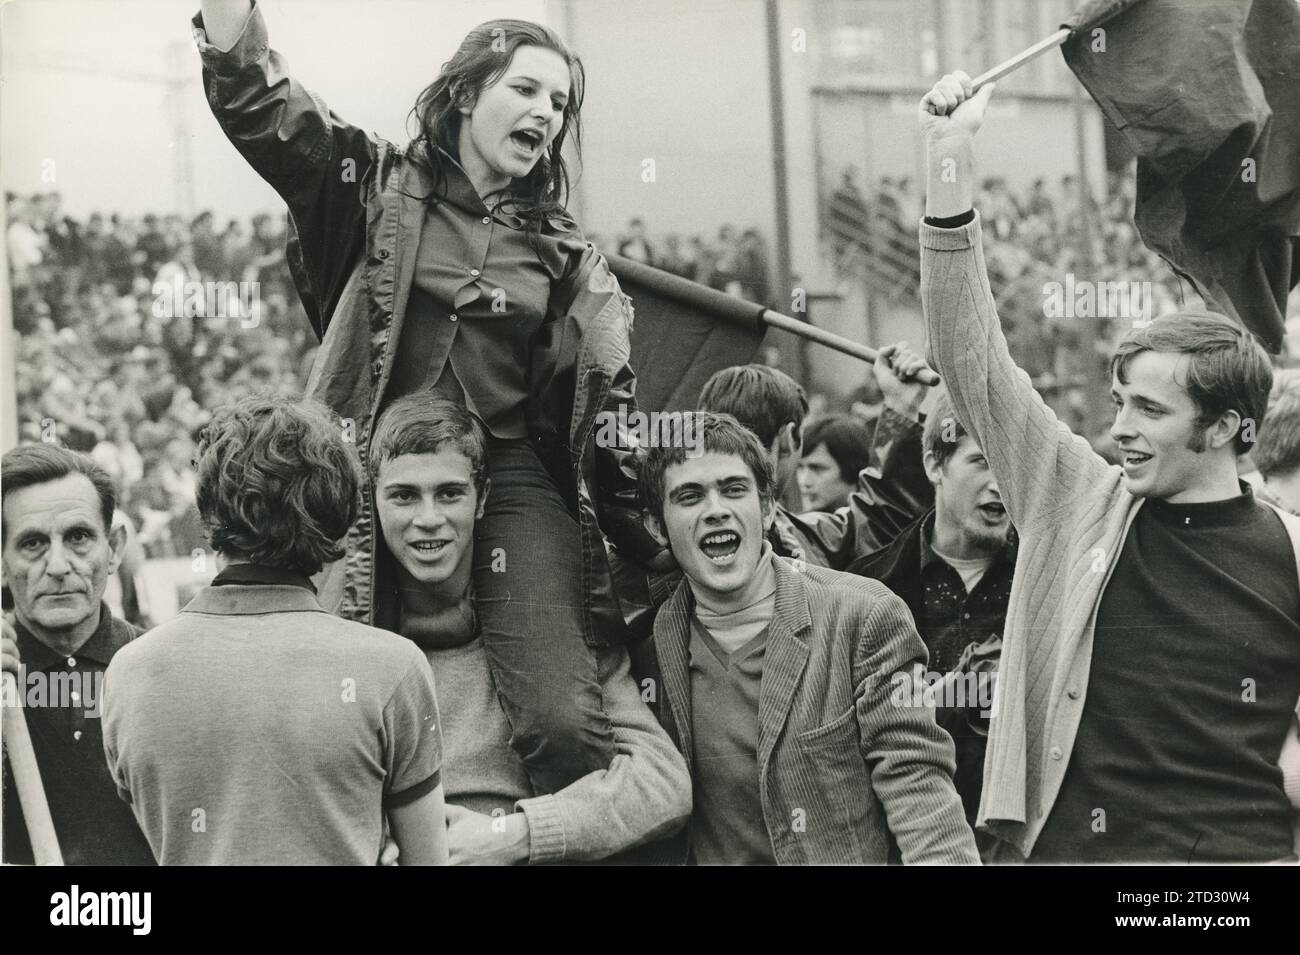 France, May 1968. Students in one of the massive demonstrations of May 68. Credit: Album / Archivo ABC Stock Photo